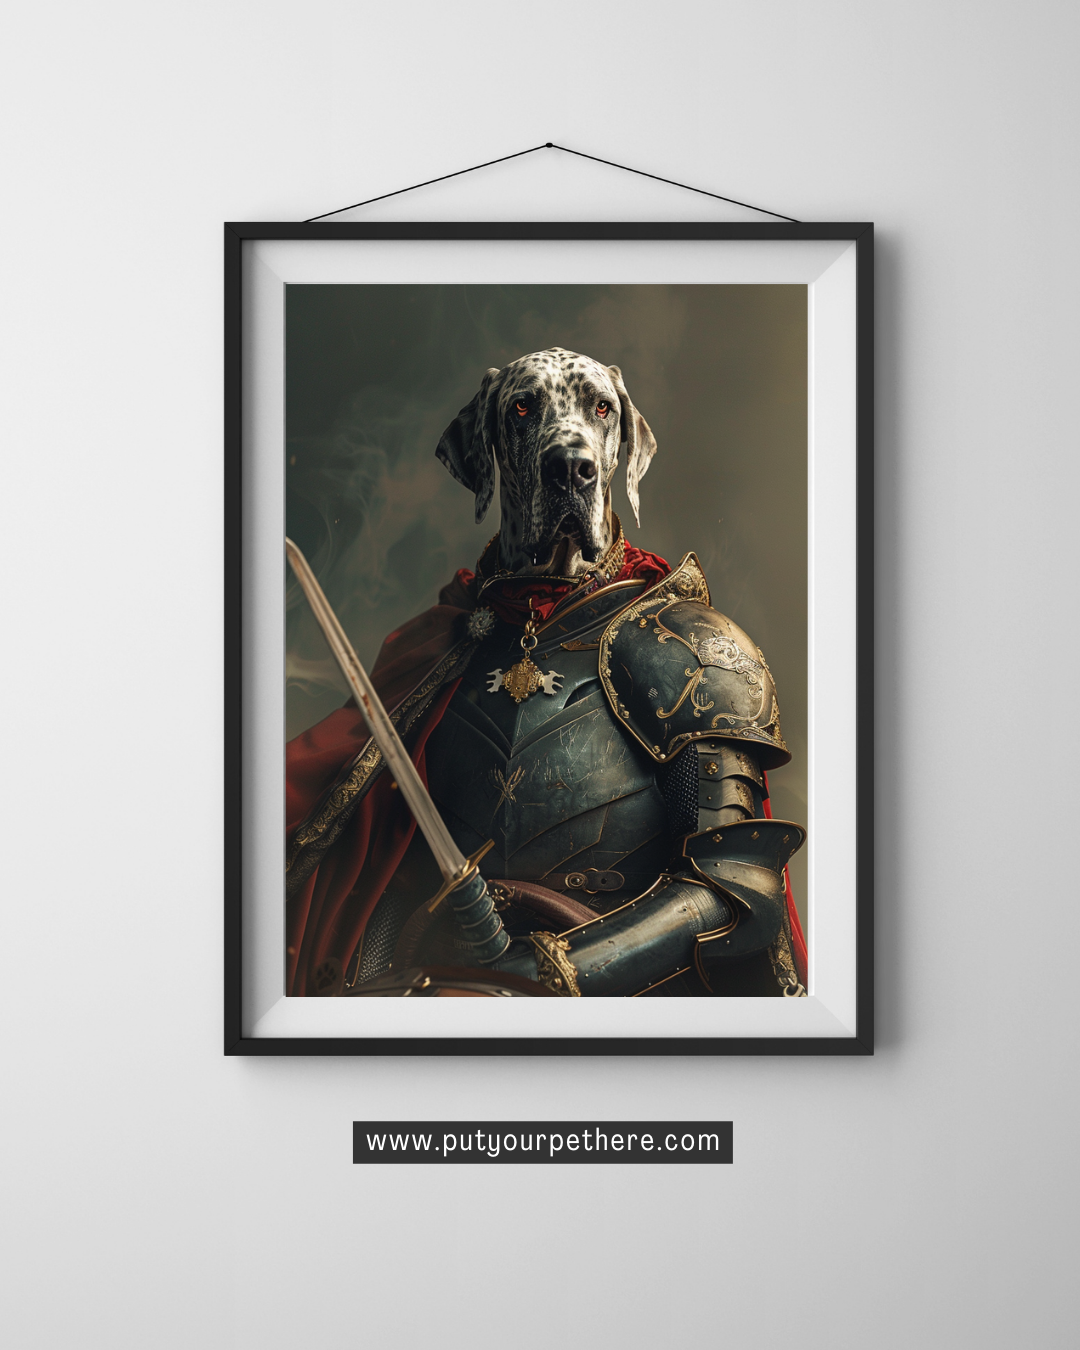 Majestic digital art of a Great Dane in full knight armor, poised with a sword and a look of nobility, suggesting a tale of valor and chivalry, available at putyourpethere.com.